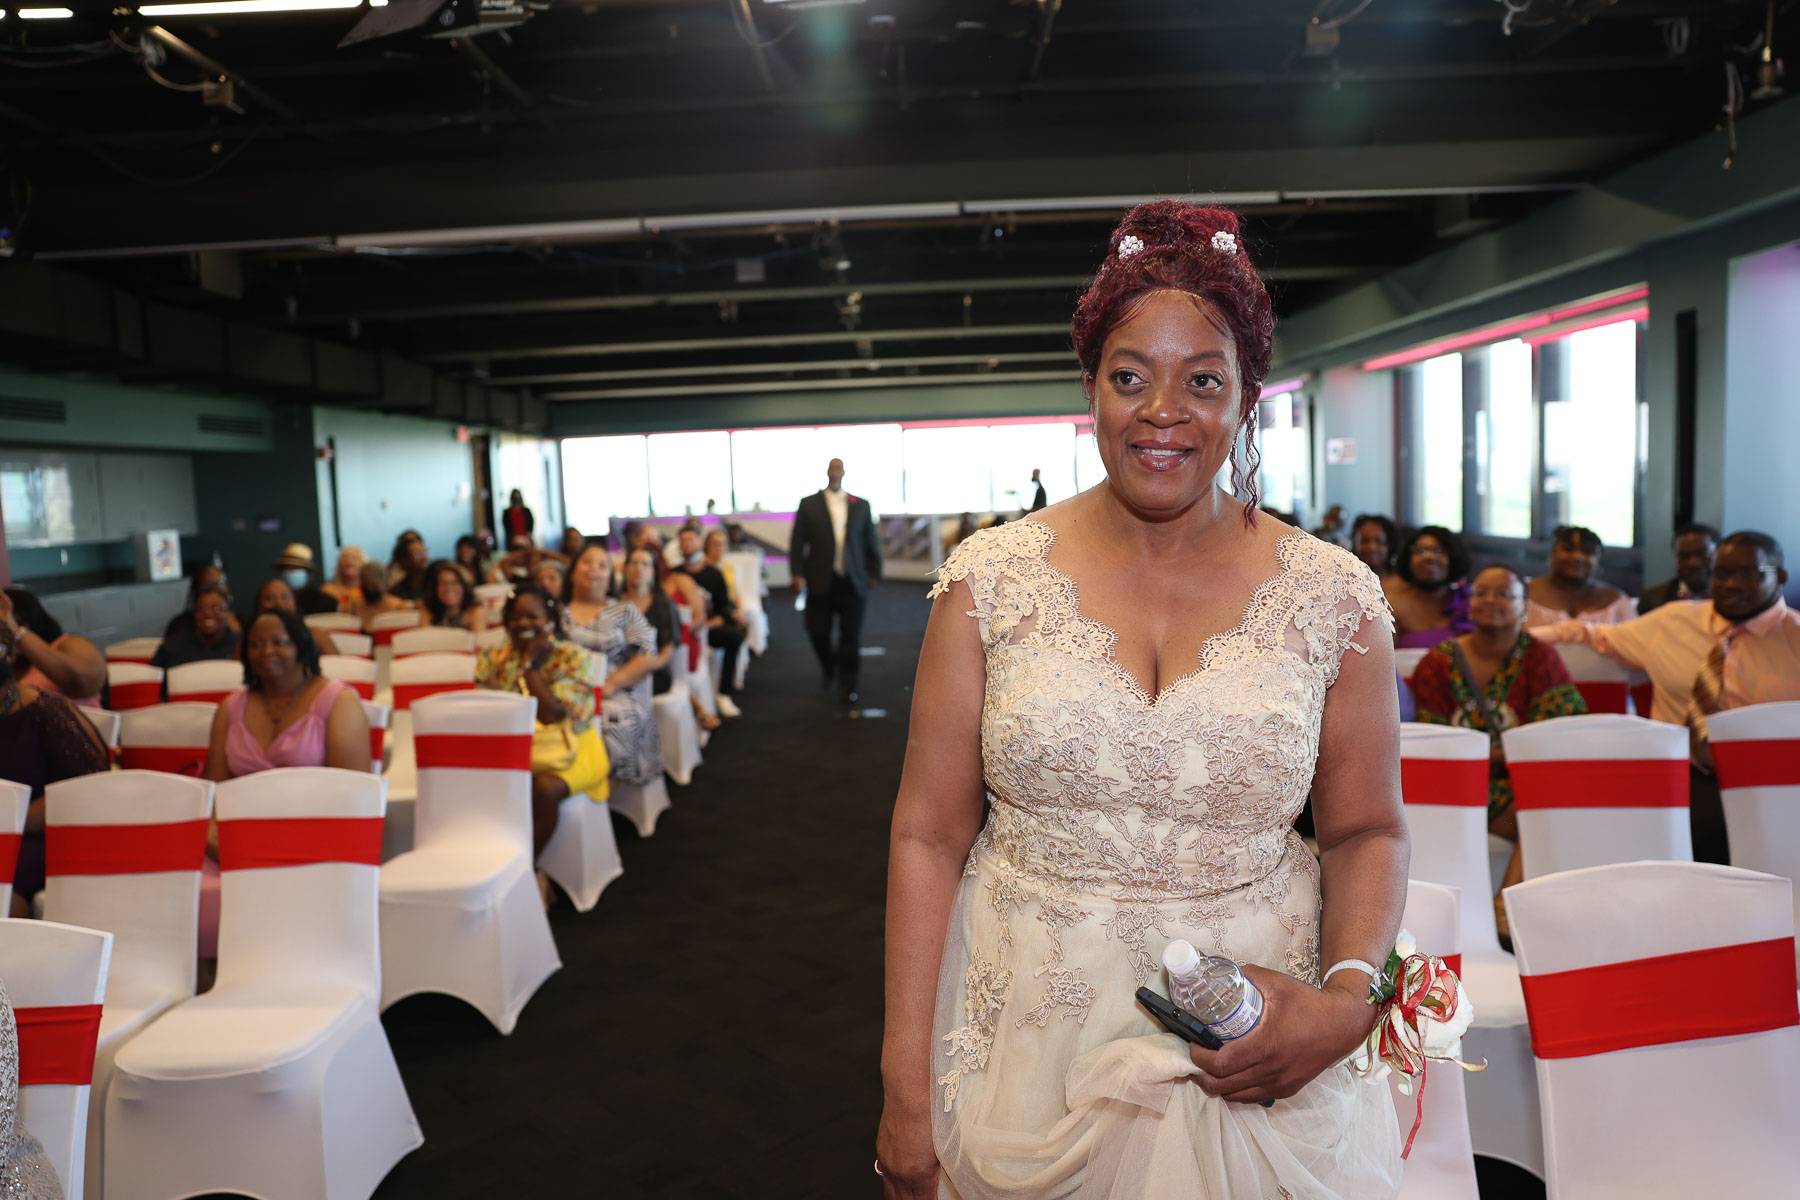 The mother of the bride at the aisle